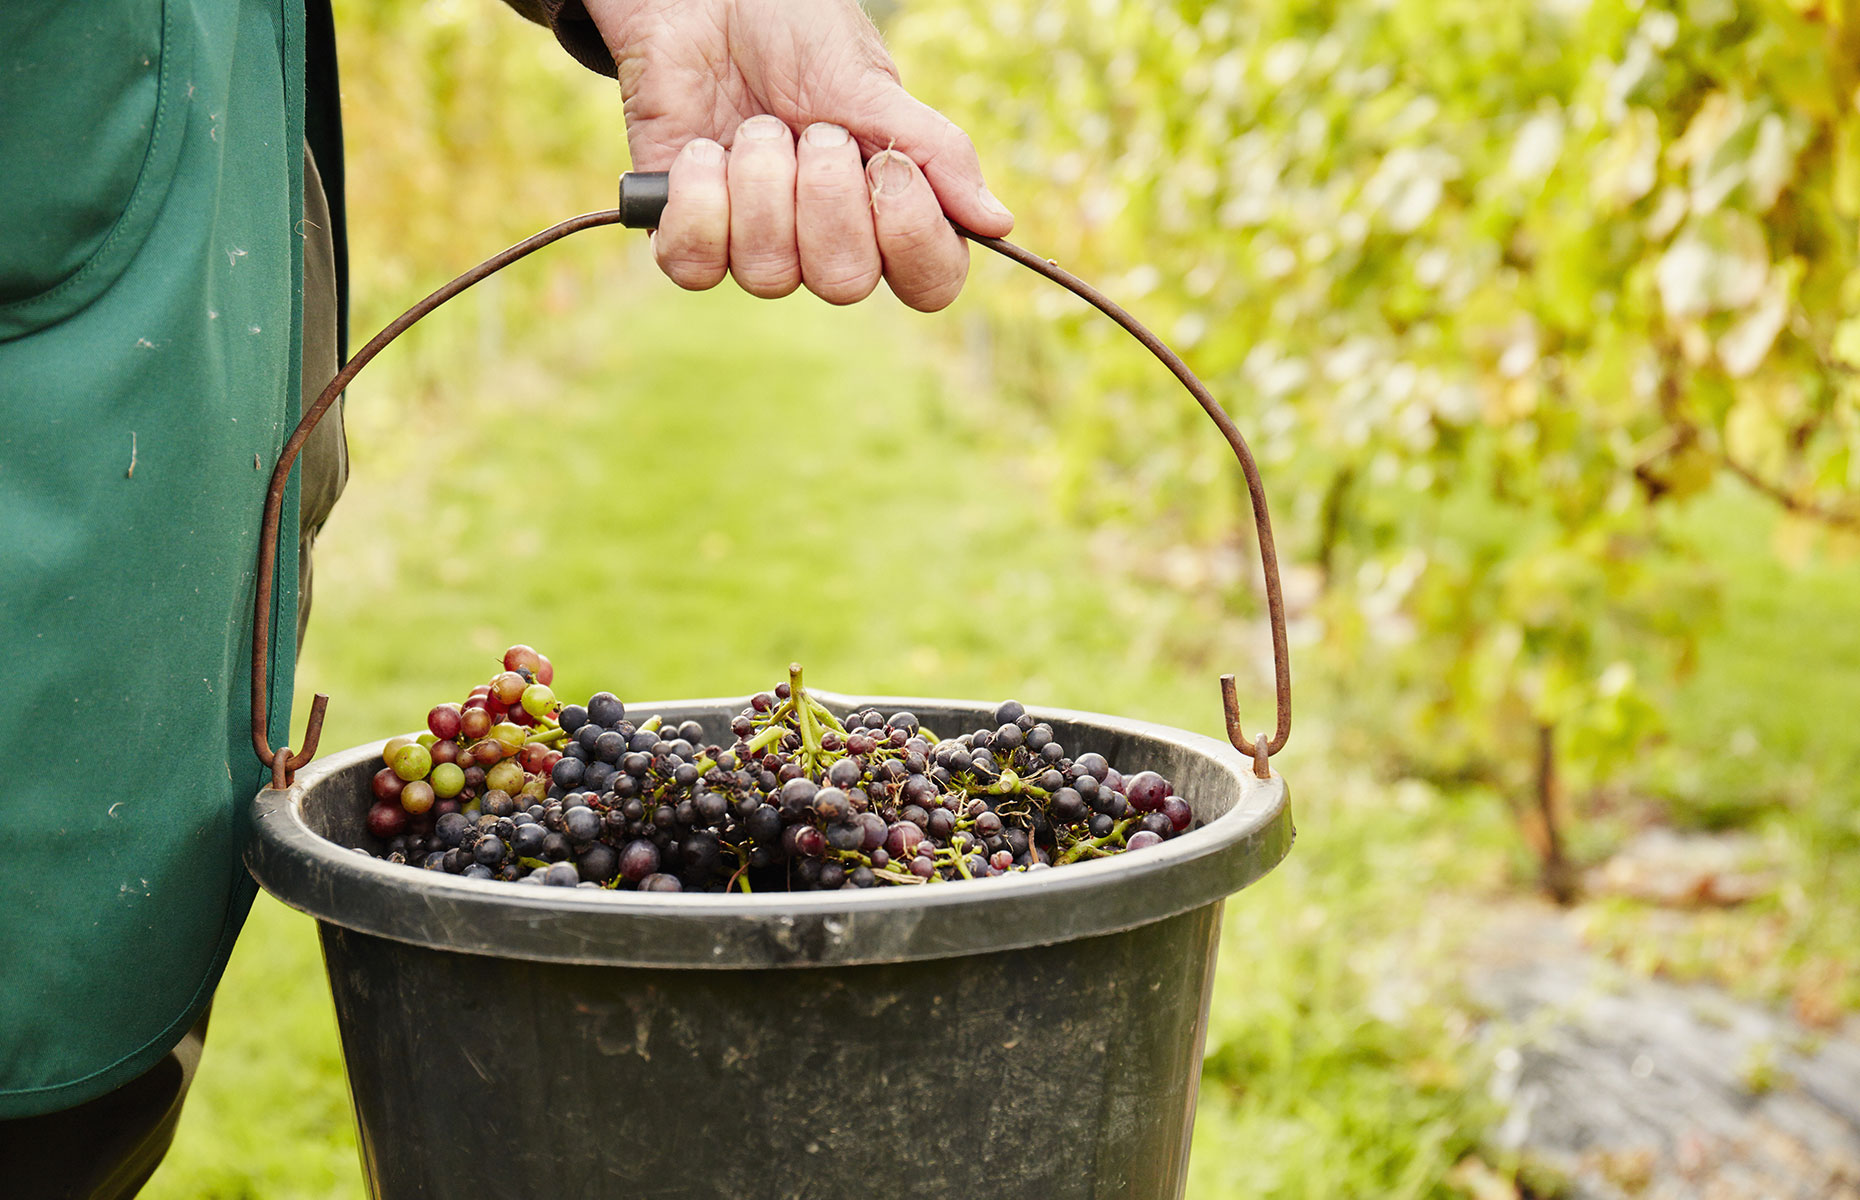 Grapes for red wine (Image: MintImages/Shutterstock)